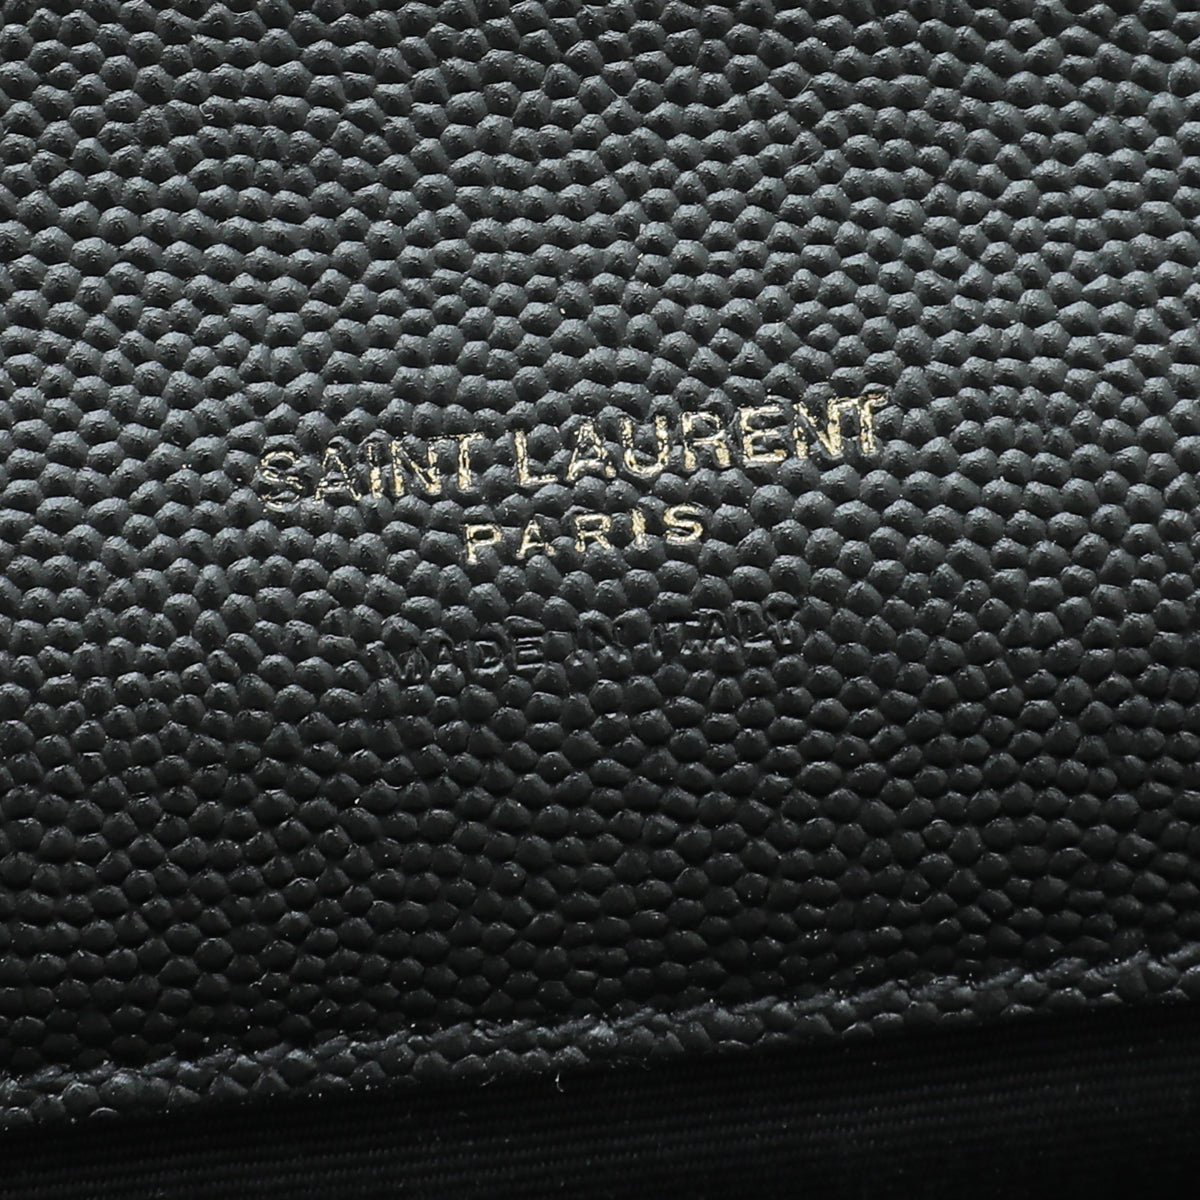 YSL Black Monogram Envelope Flap Mix Quilted Pouch